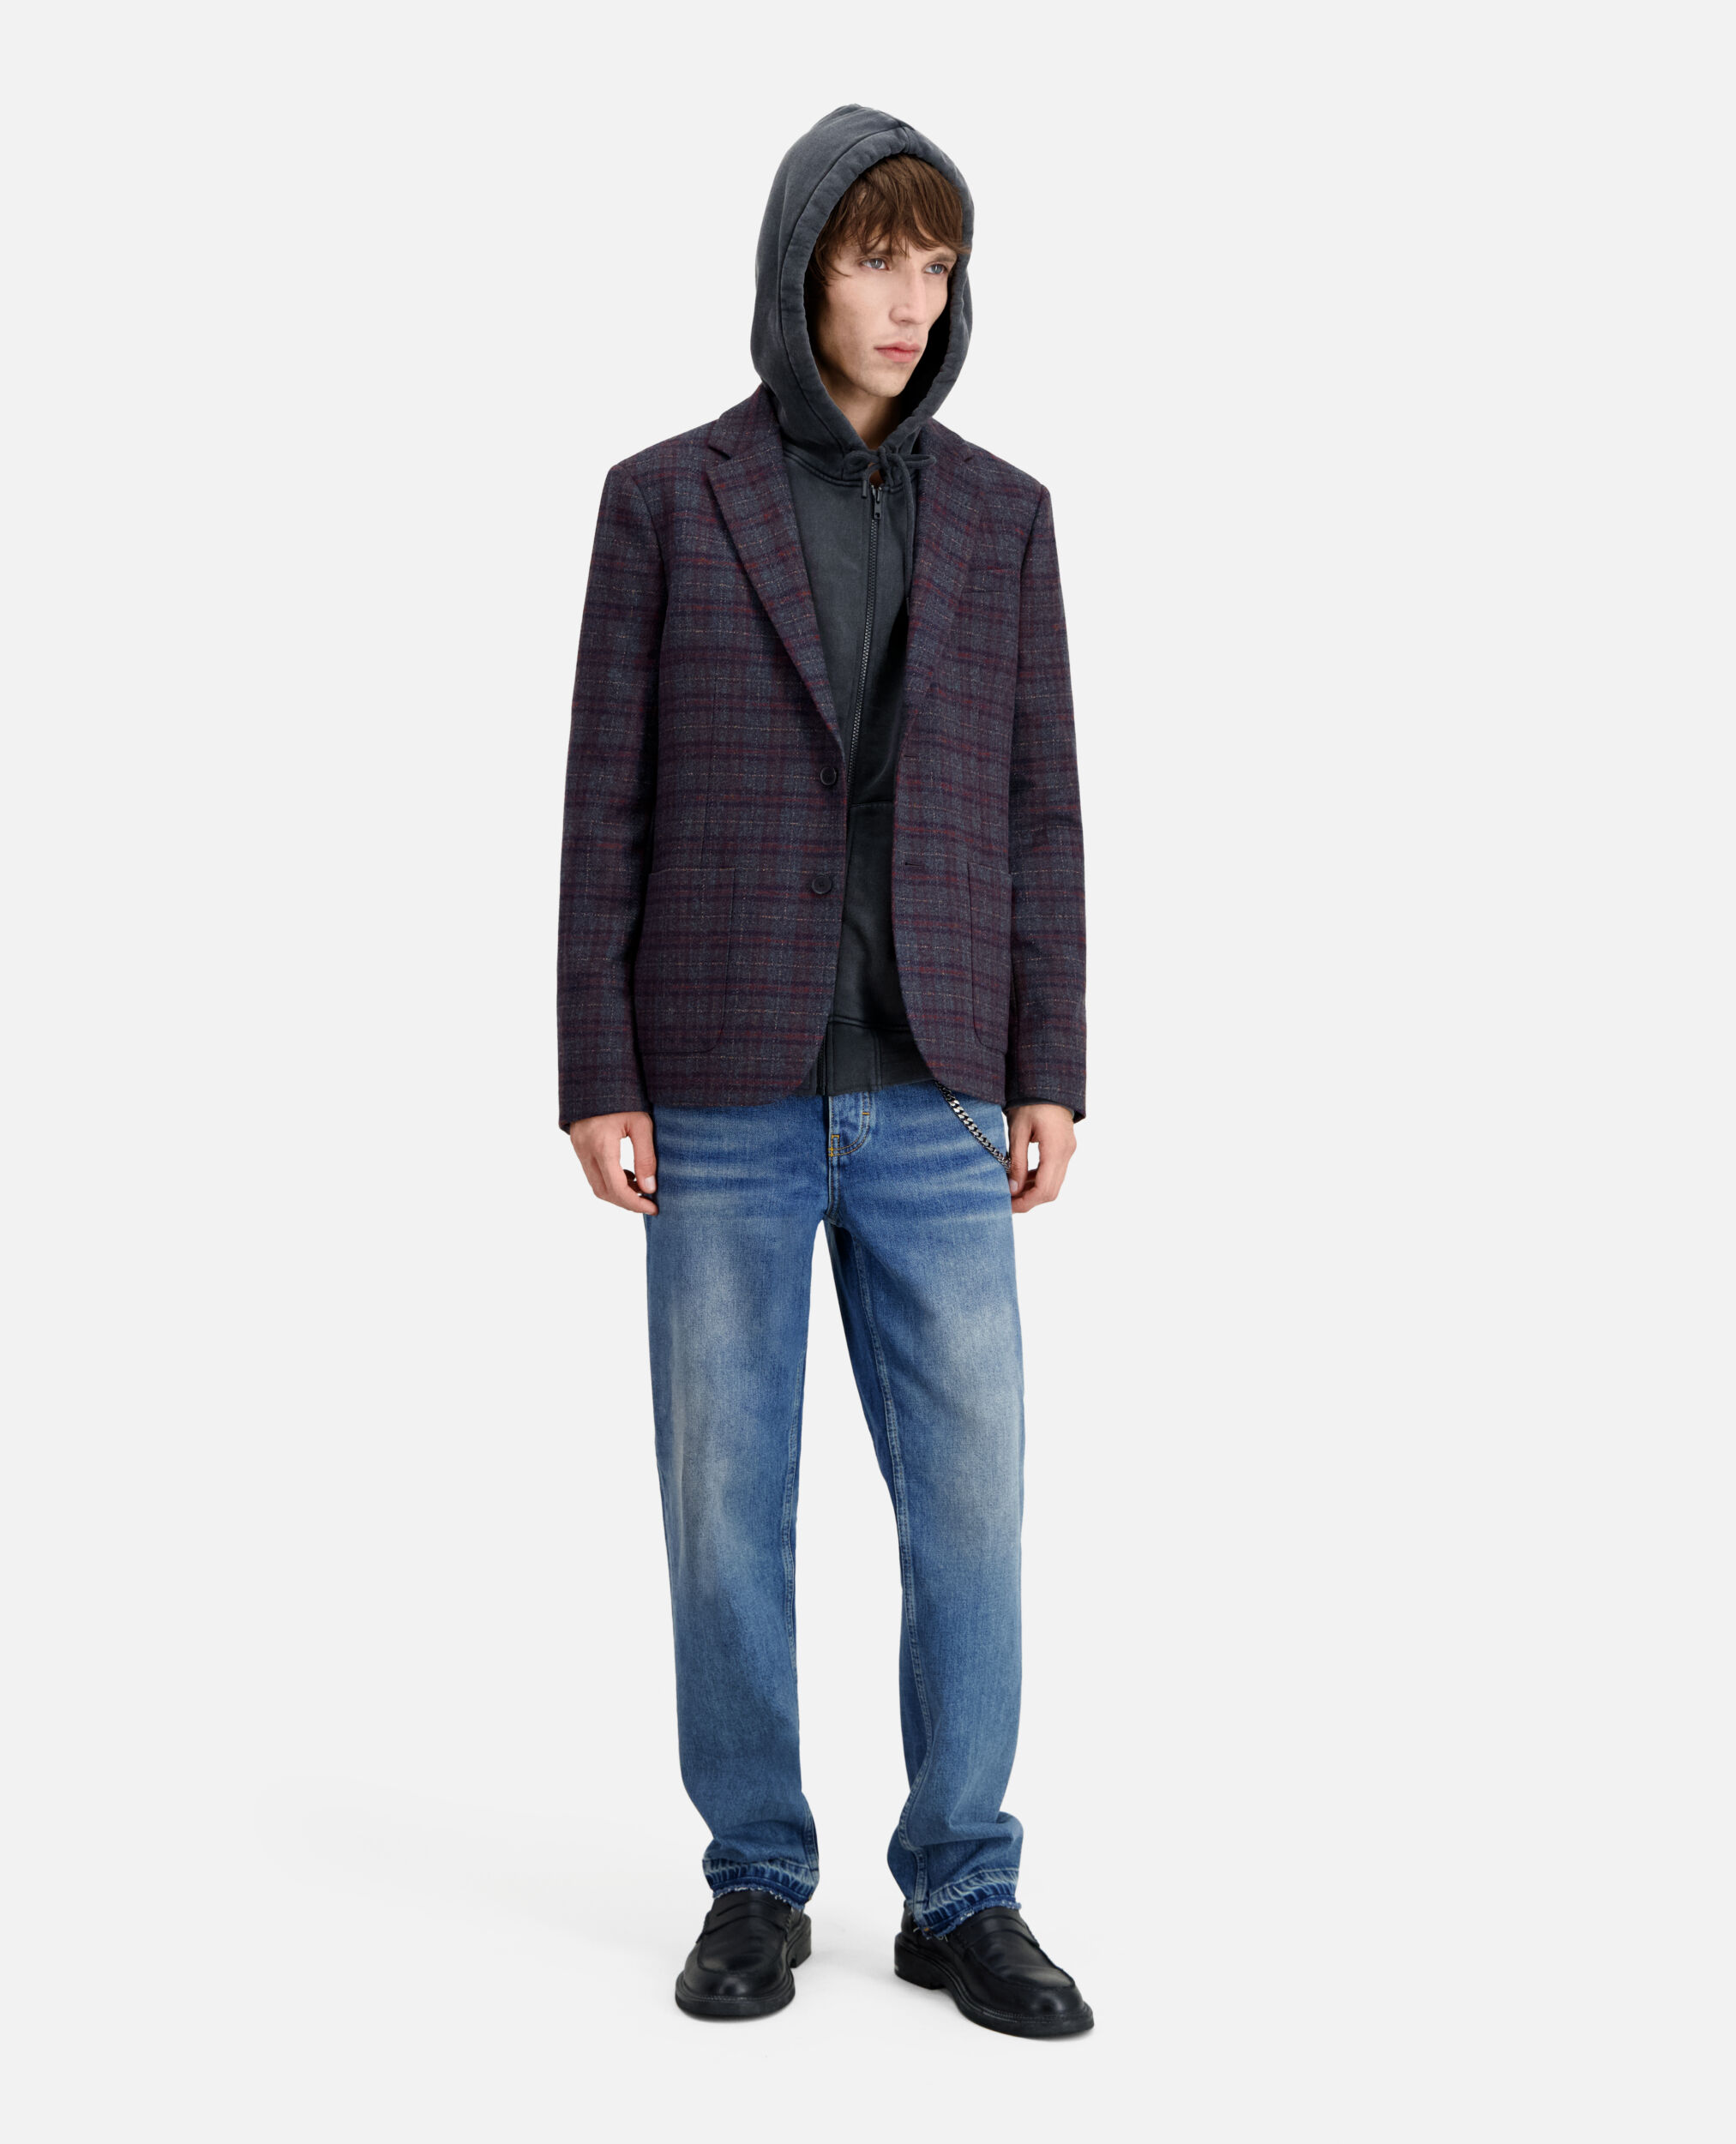 Checkered wool jacket, CARREAUX, hi-res image number null